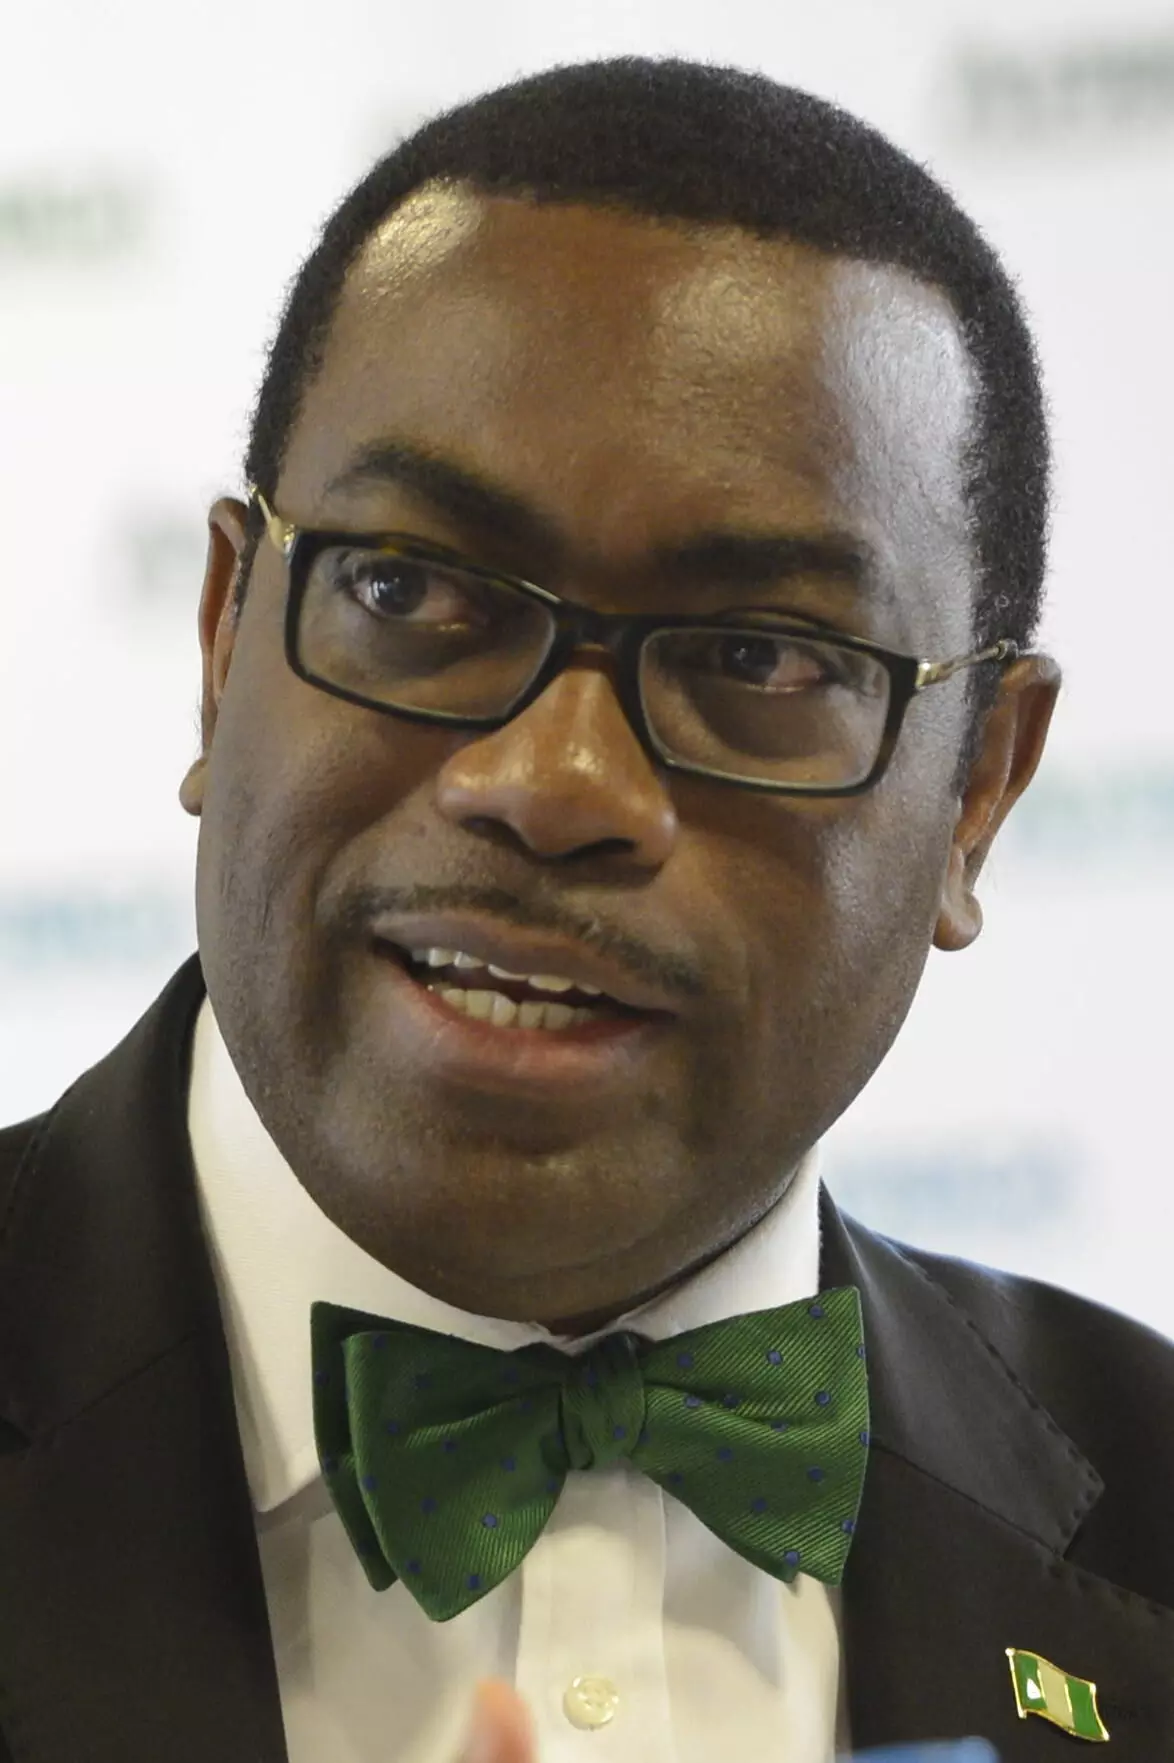 Its time for Nigeria to create youth-based wealth —Adesina